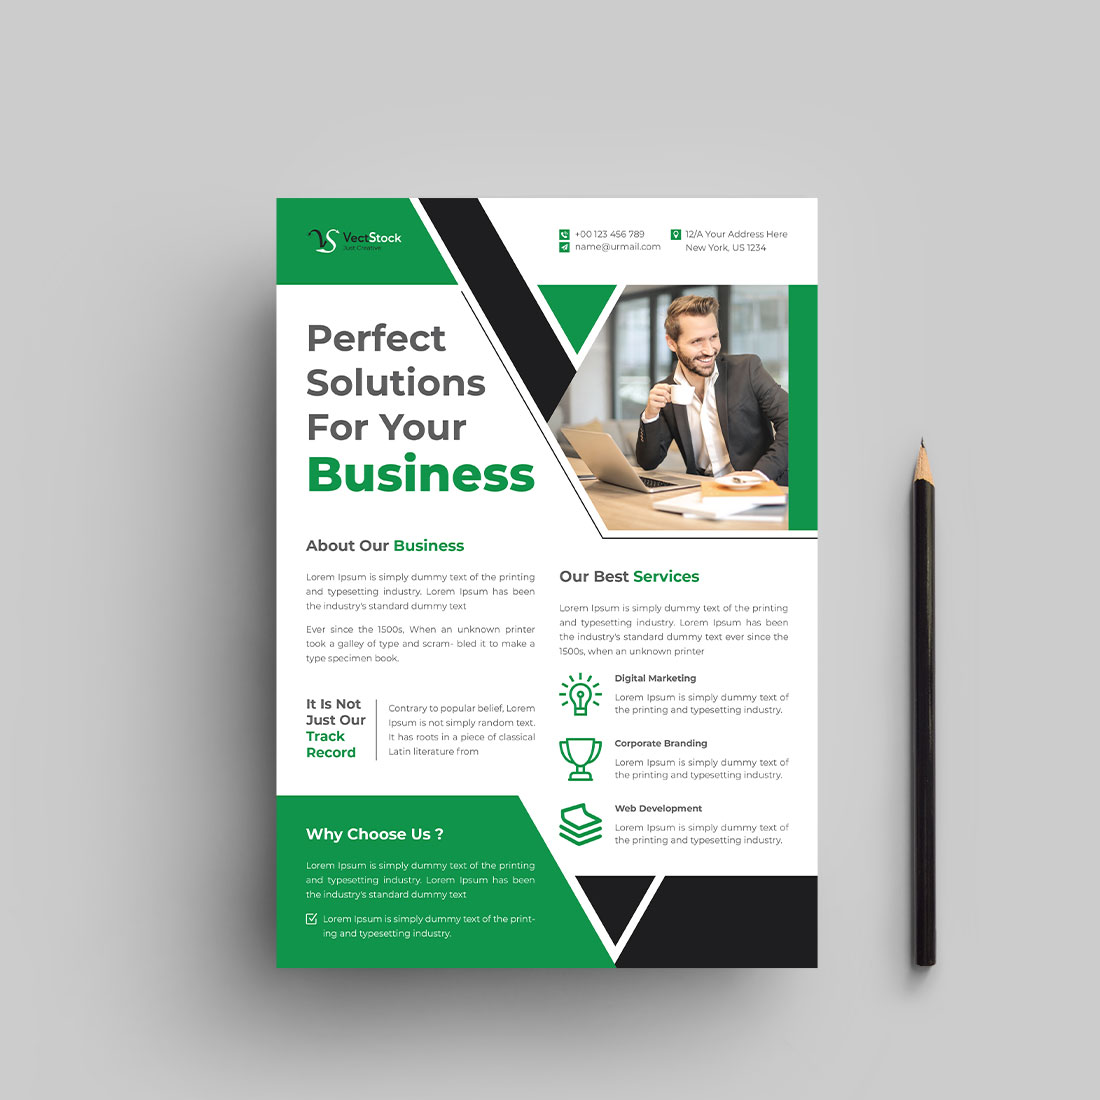 Business solutions flyer design template cover image.